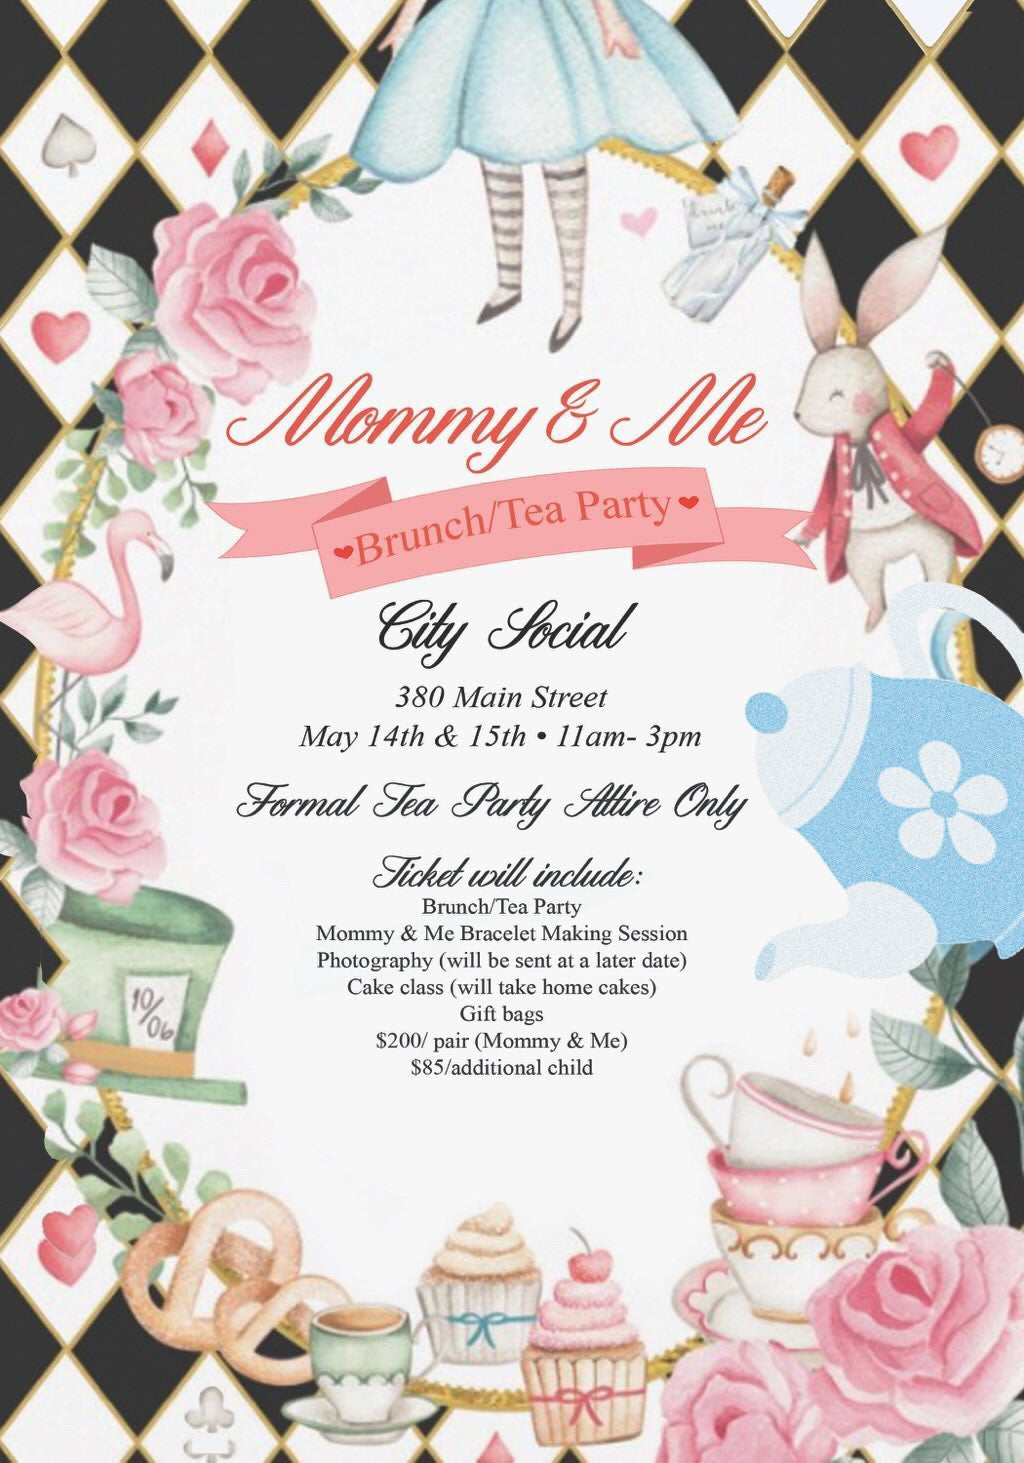 Mommy & Me Tea Party Ticket (SATURDAY 5/14)